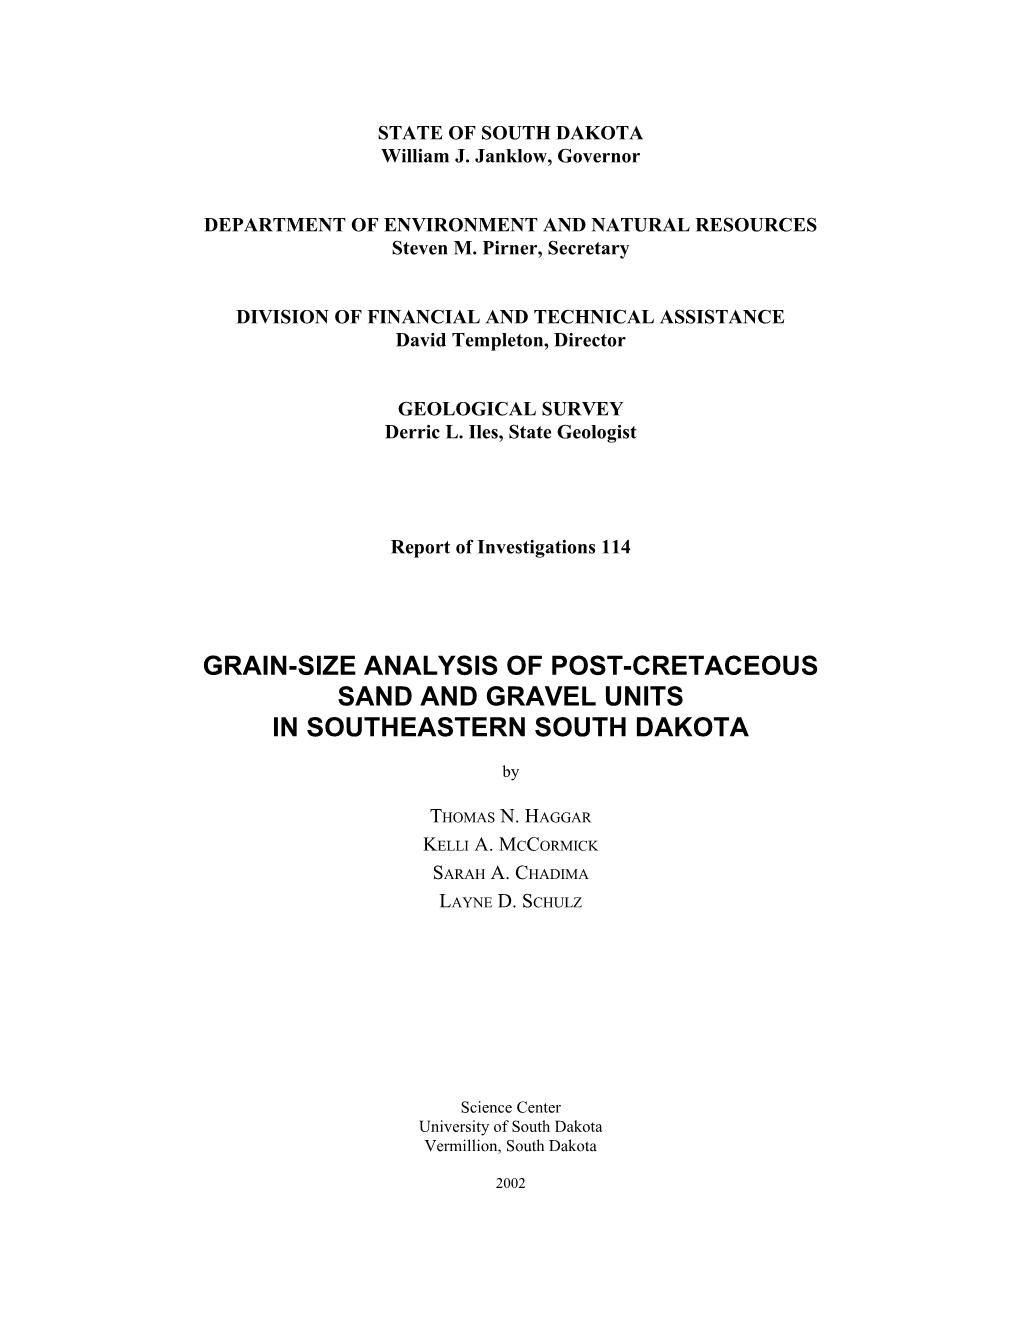 Grain Size Analysis of Post-Cretaceous Sand and Gravel Units in Southeastern South Dakota